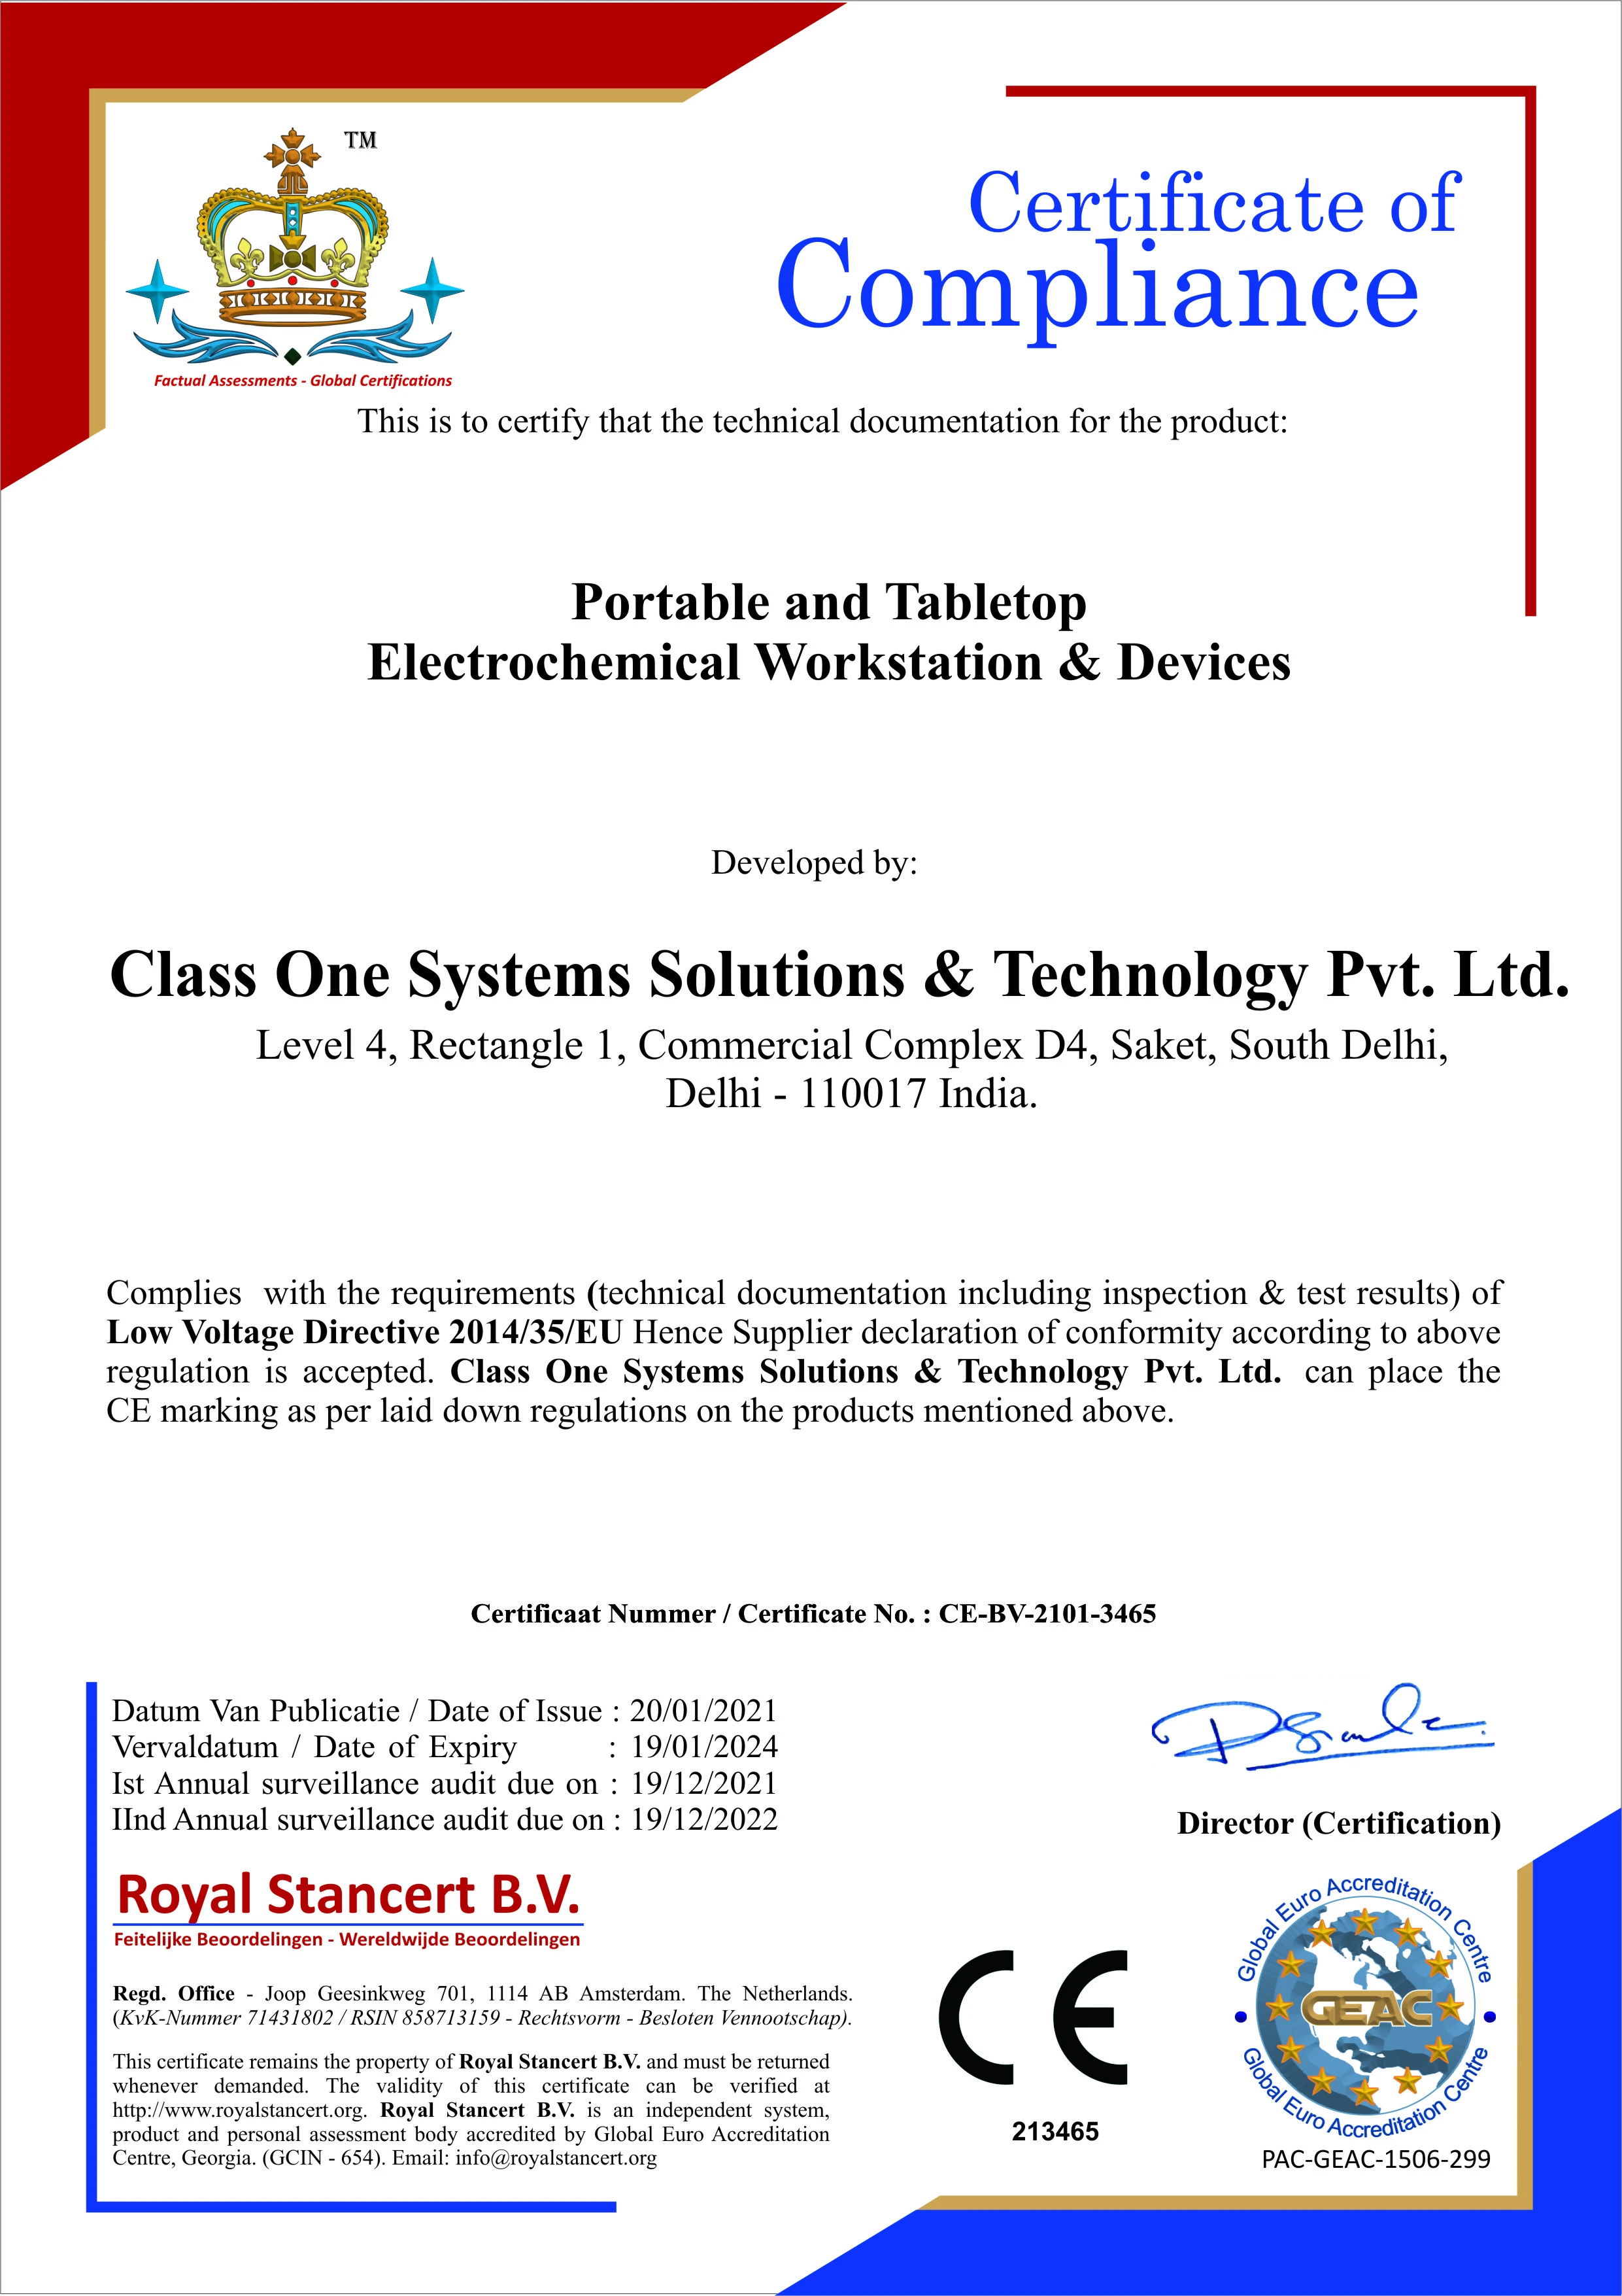 Class One Systems